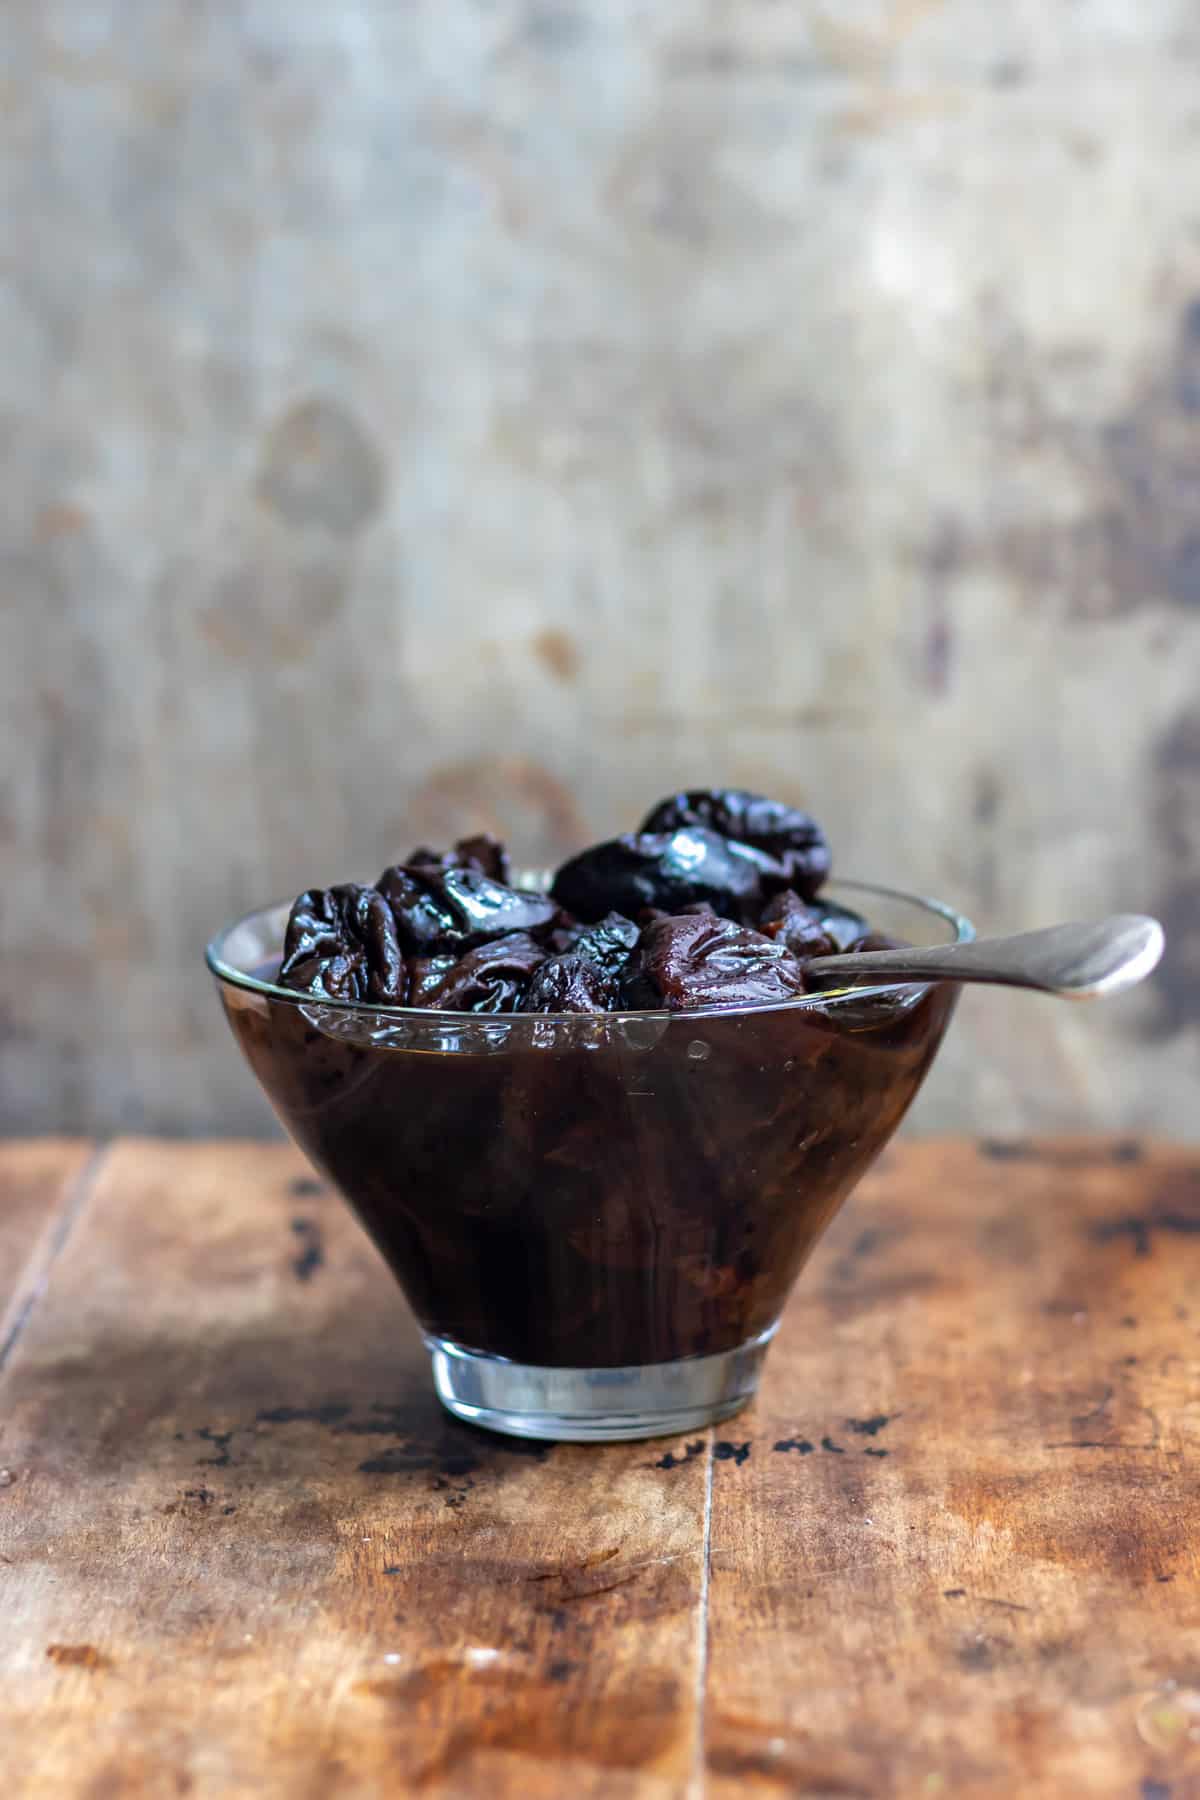 Dish of cooked prunes on a wooden table.